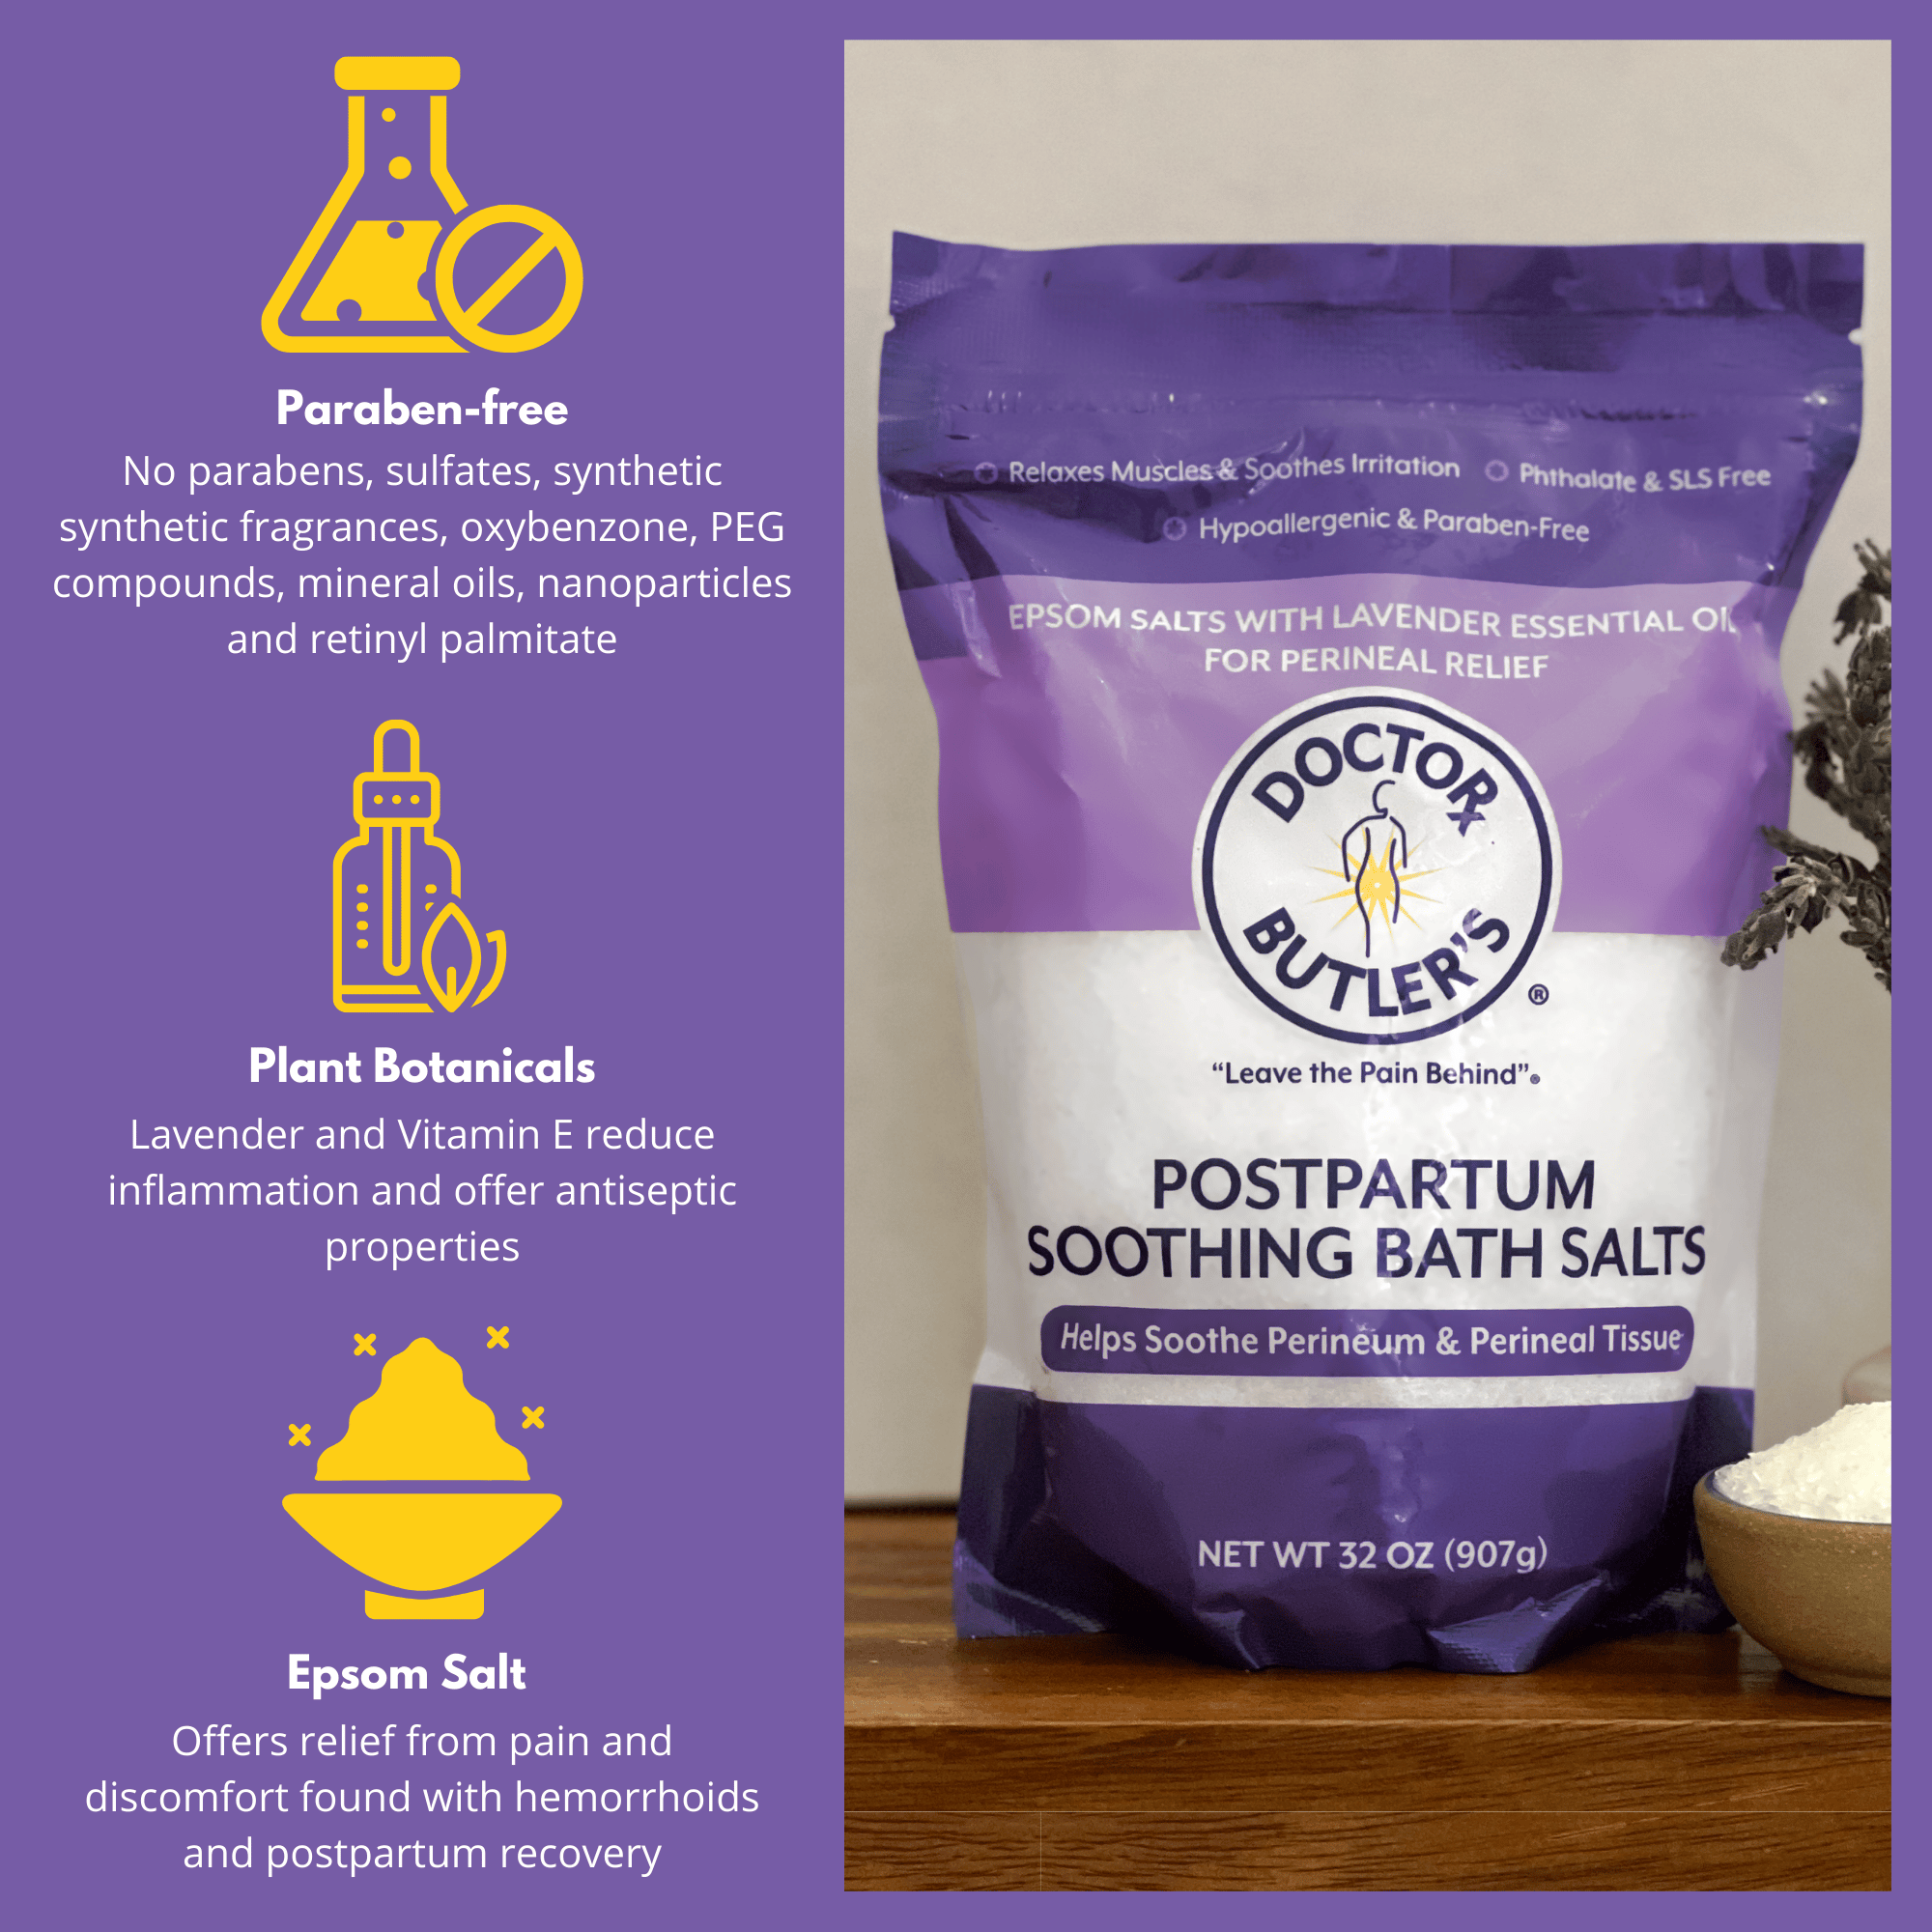 Postpartum Soothing Bath Salts by Doctor Butler's